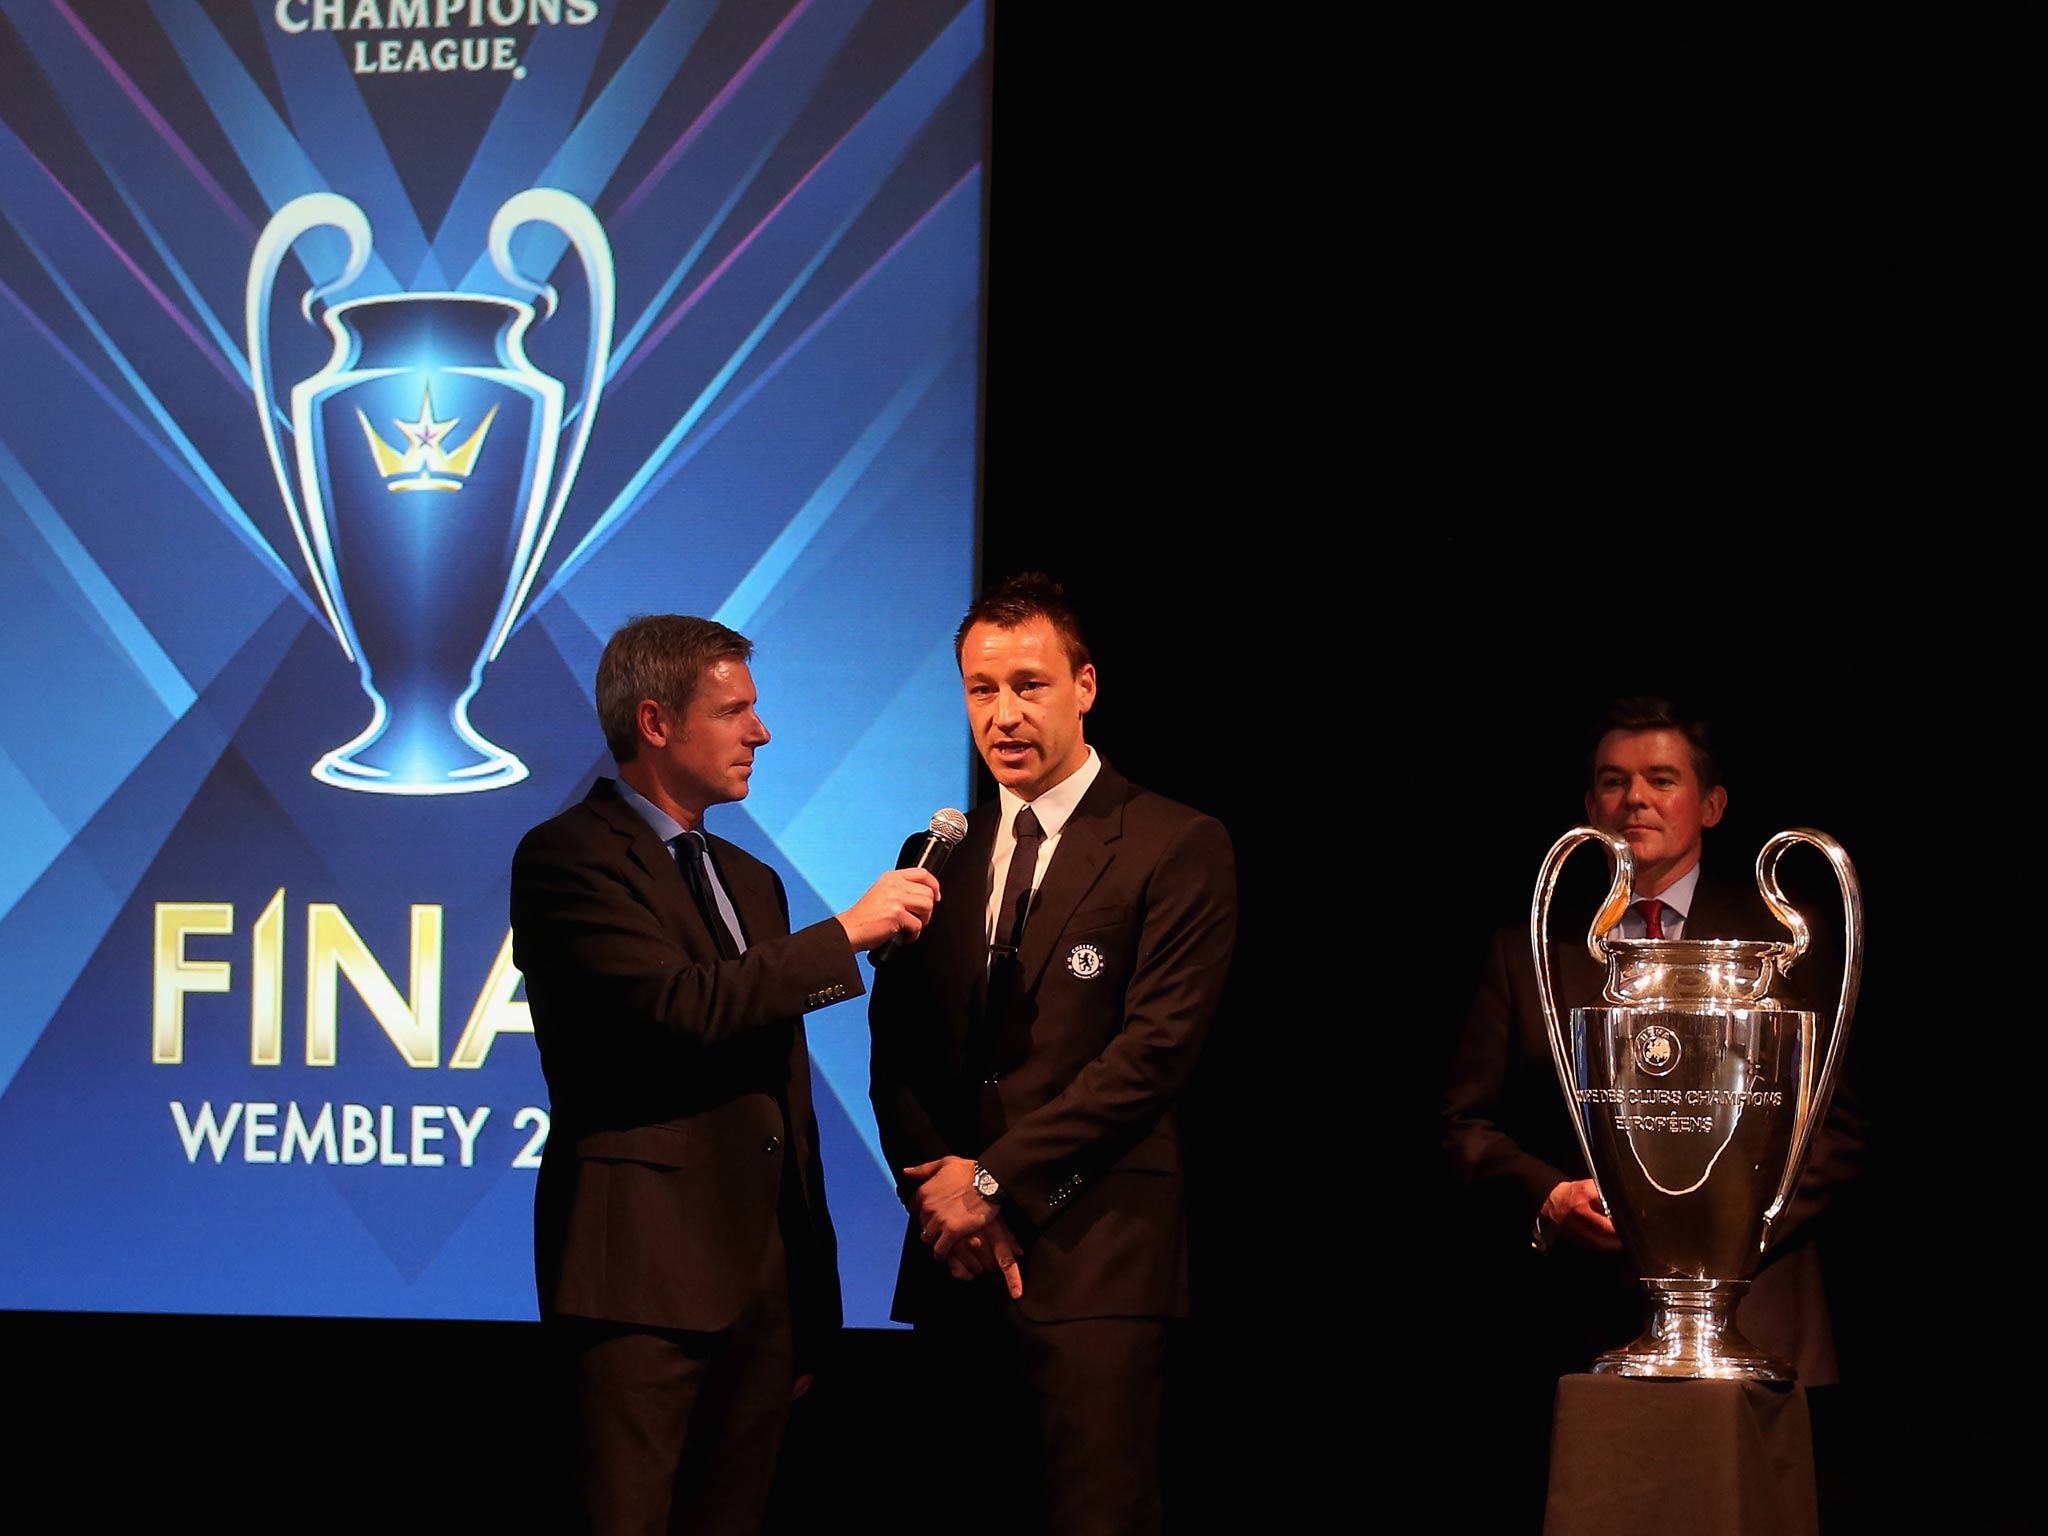 John Terry at an event to hand over the Champions League trophy